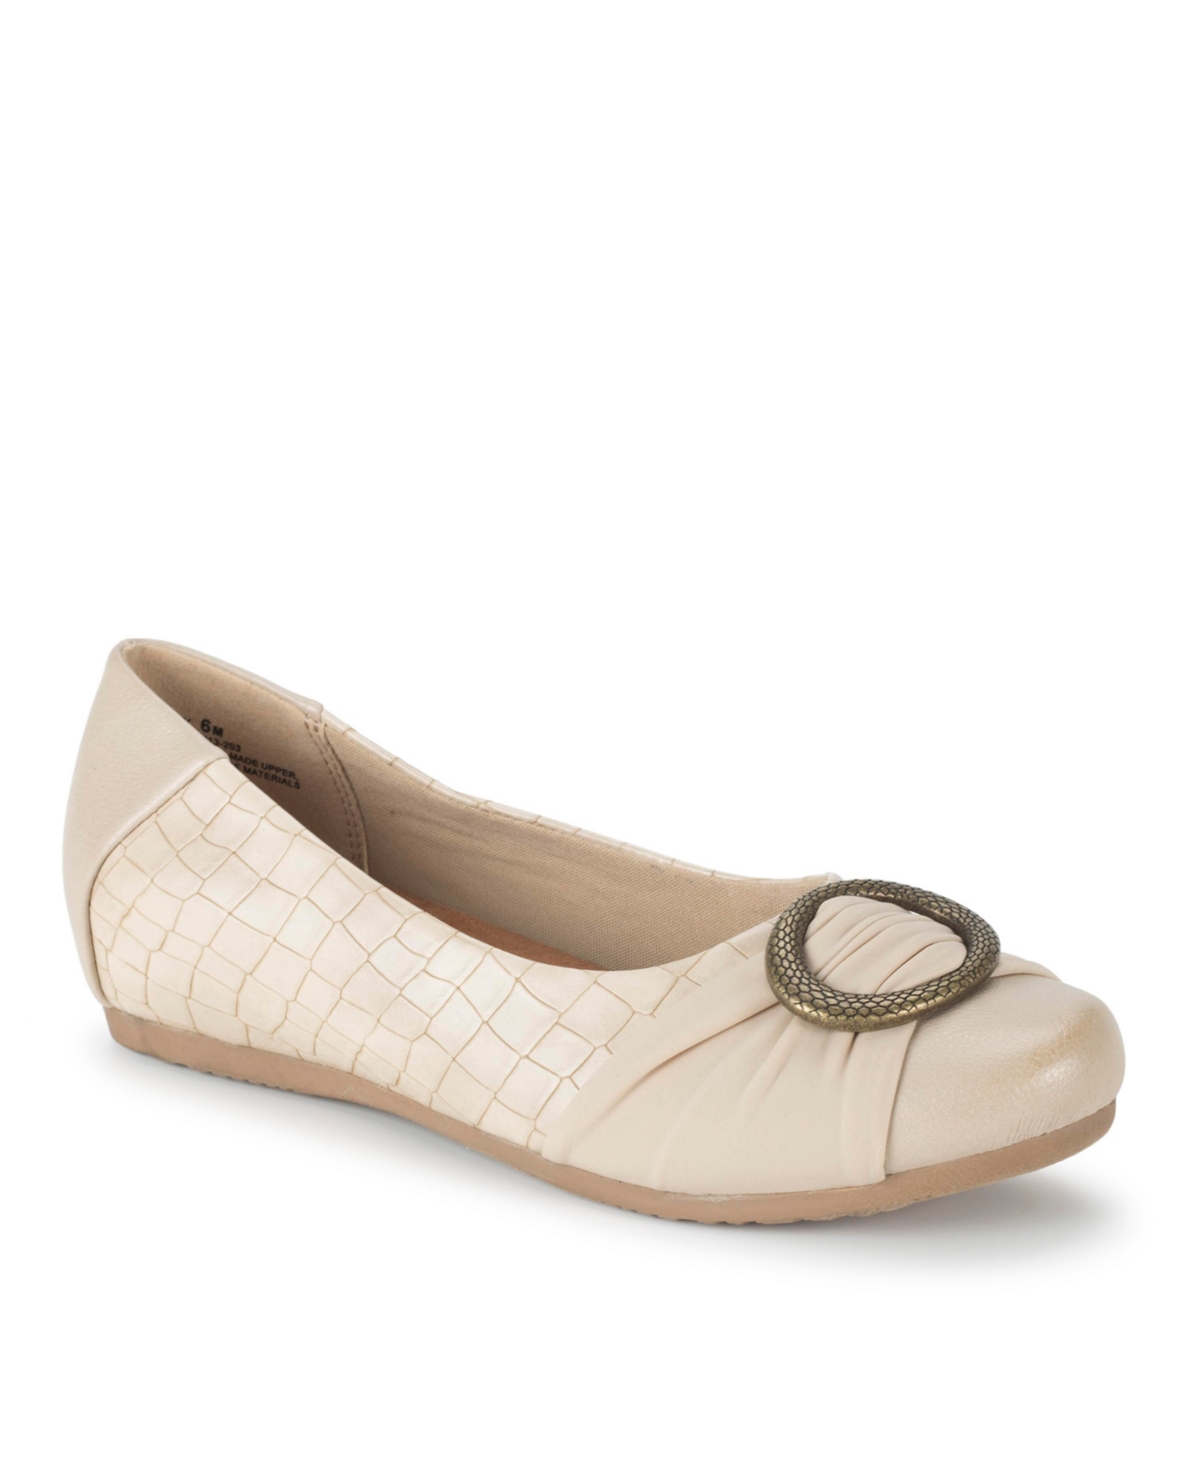 Women's Mabely Flats - Camel